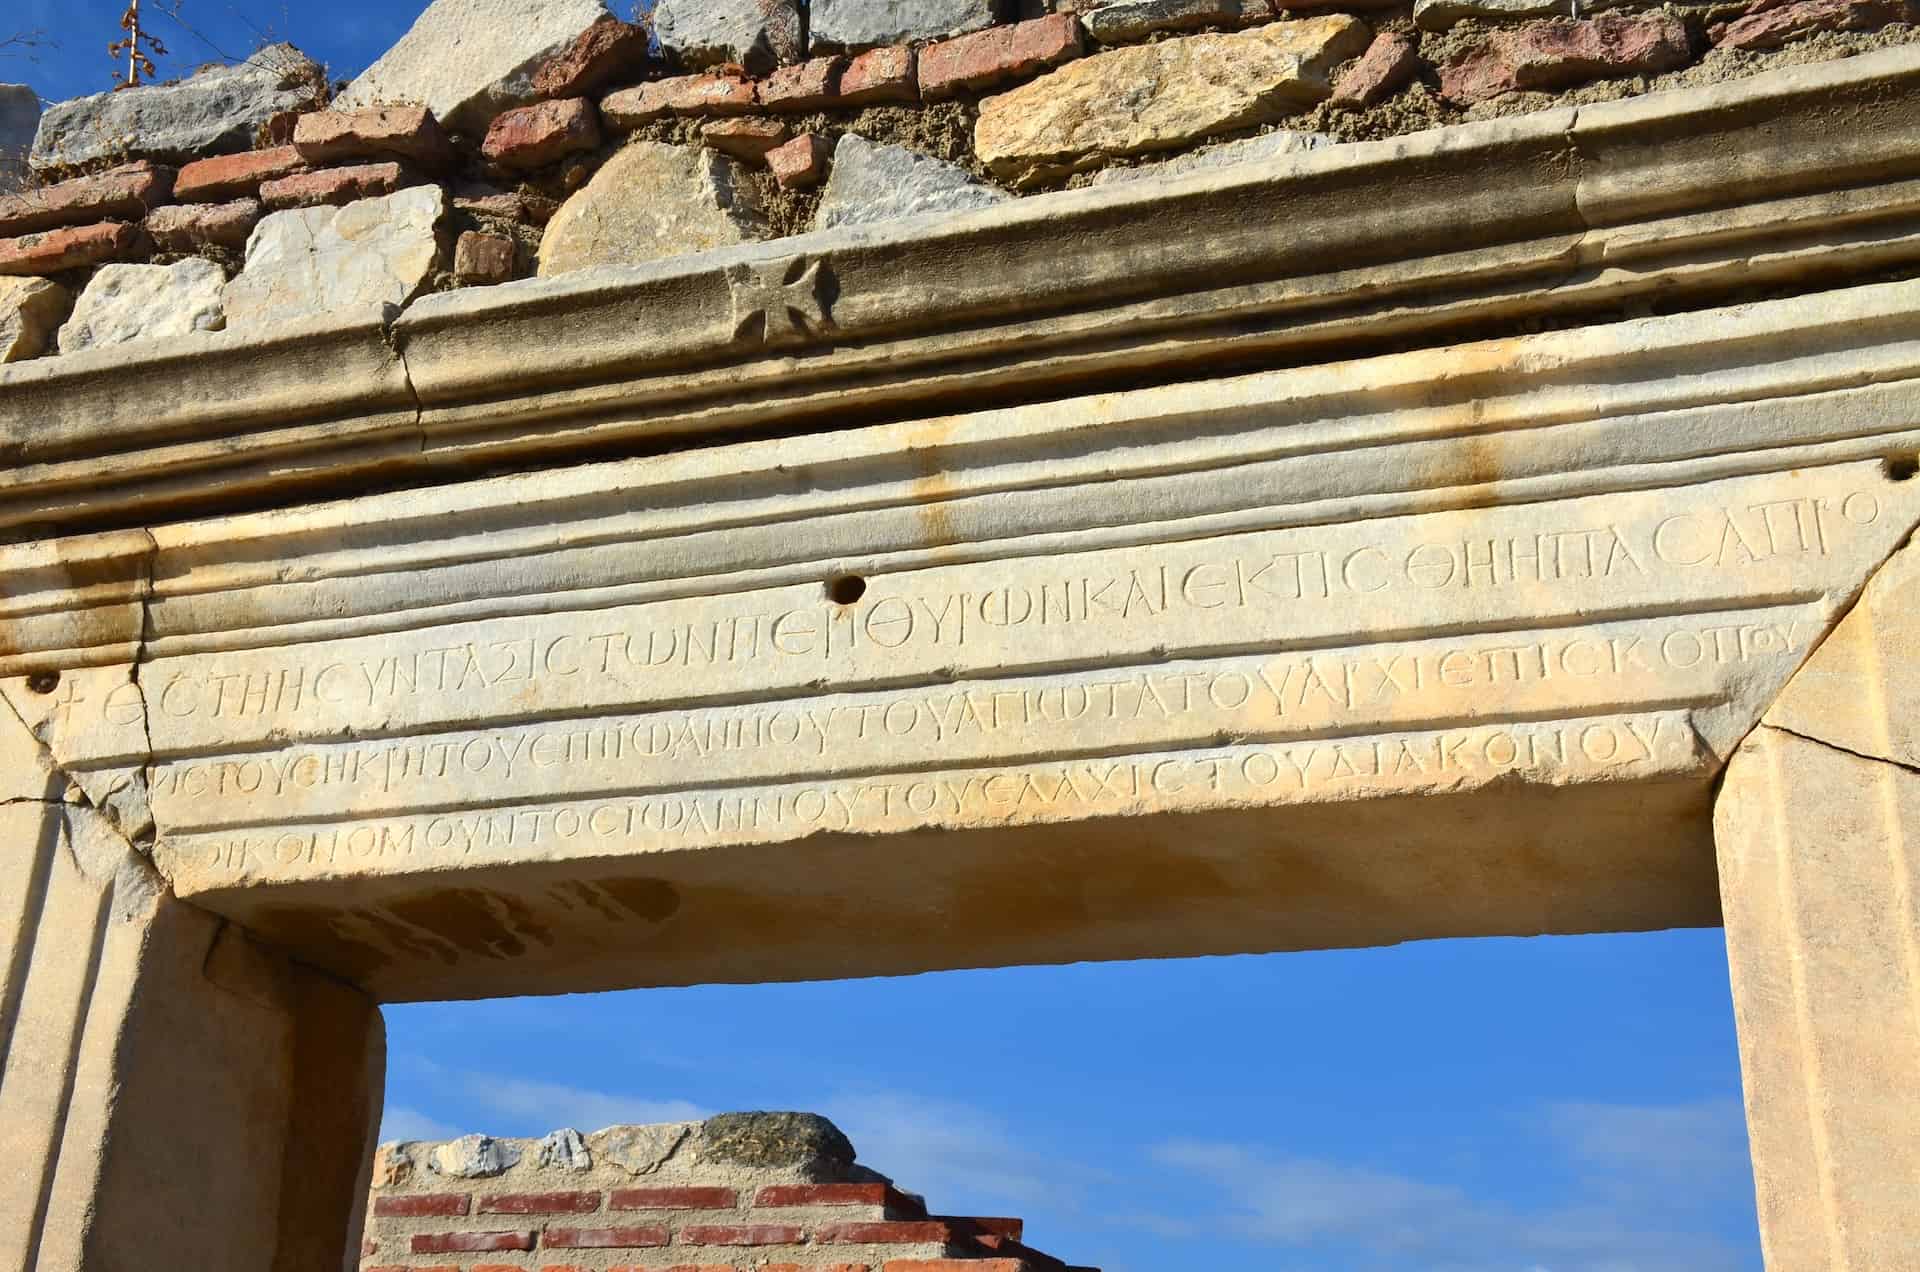 Greek inscription on the door to the baptistry from the vestibule at the Basilica of Saint John in Selçuk, Turkey